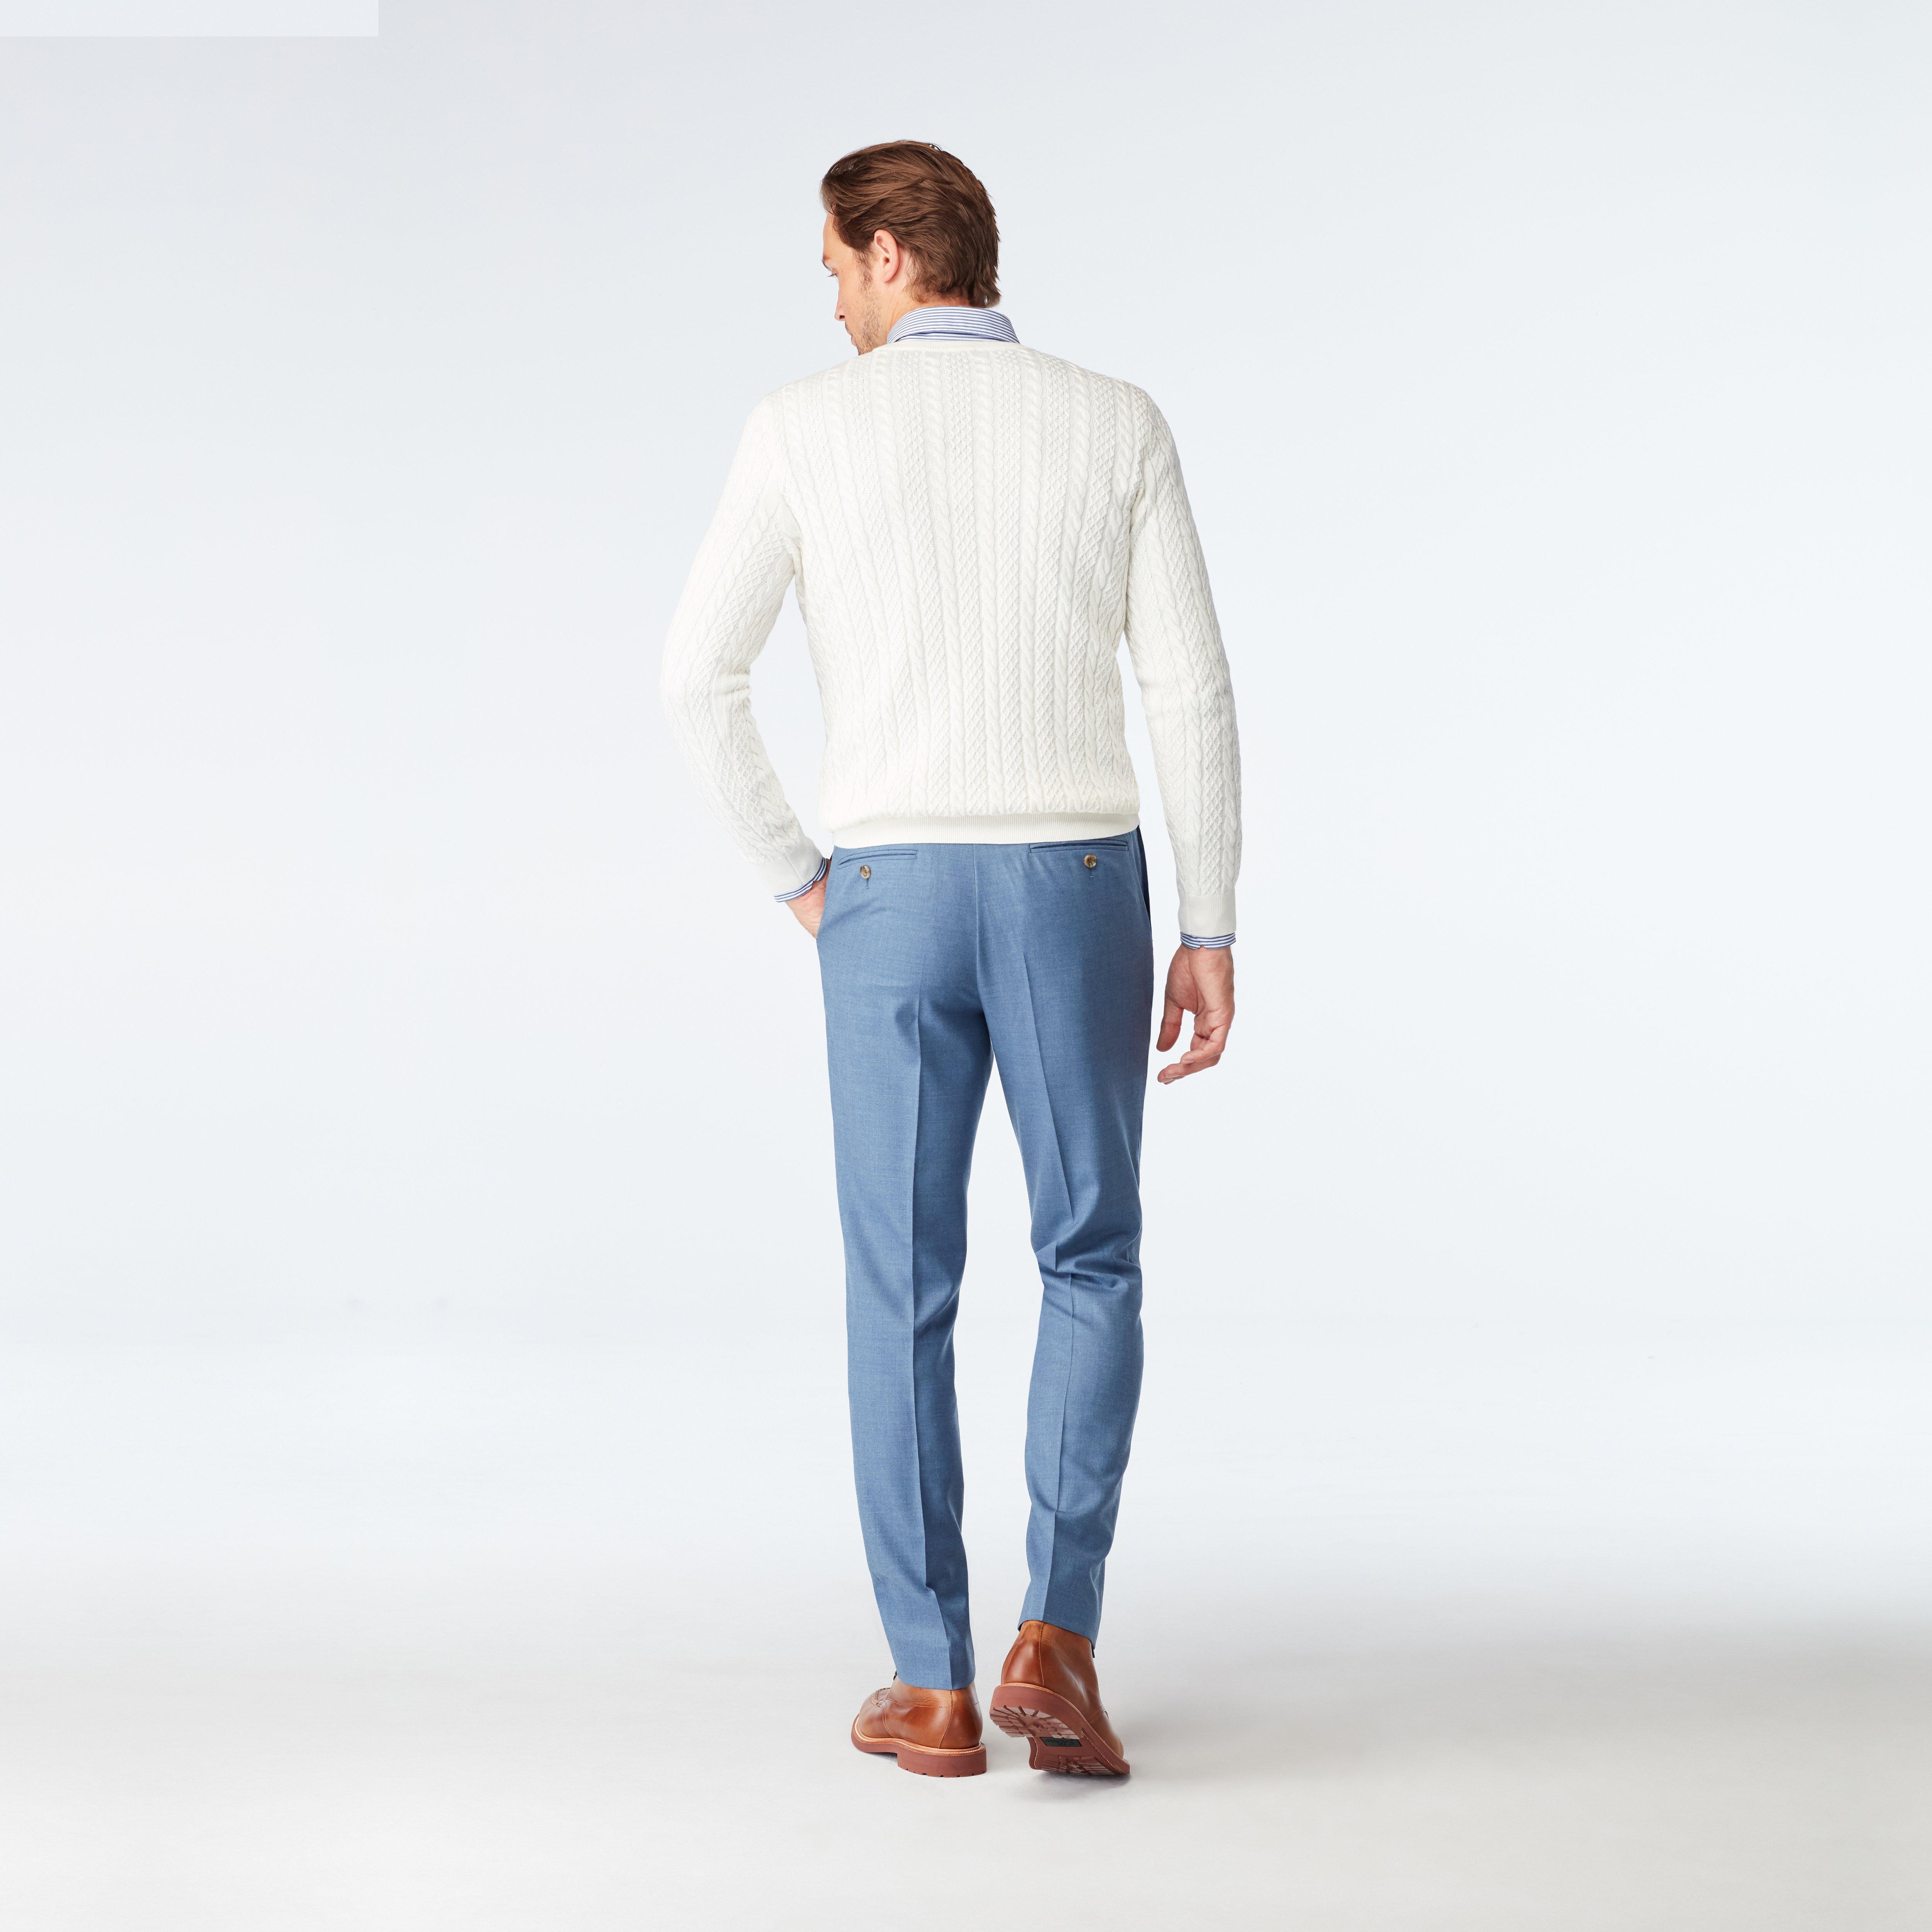 Custom Pants Made For You - Hayward Flannel Light Blue Pants | INDOCHINO